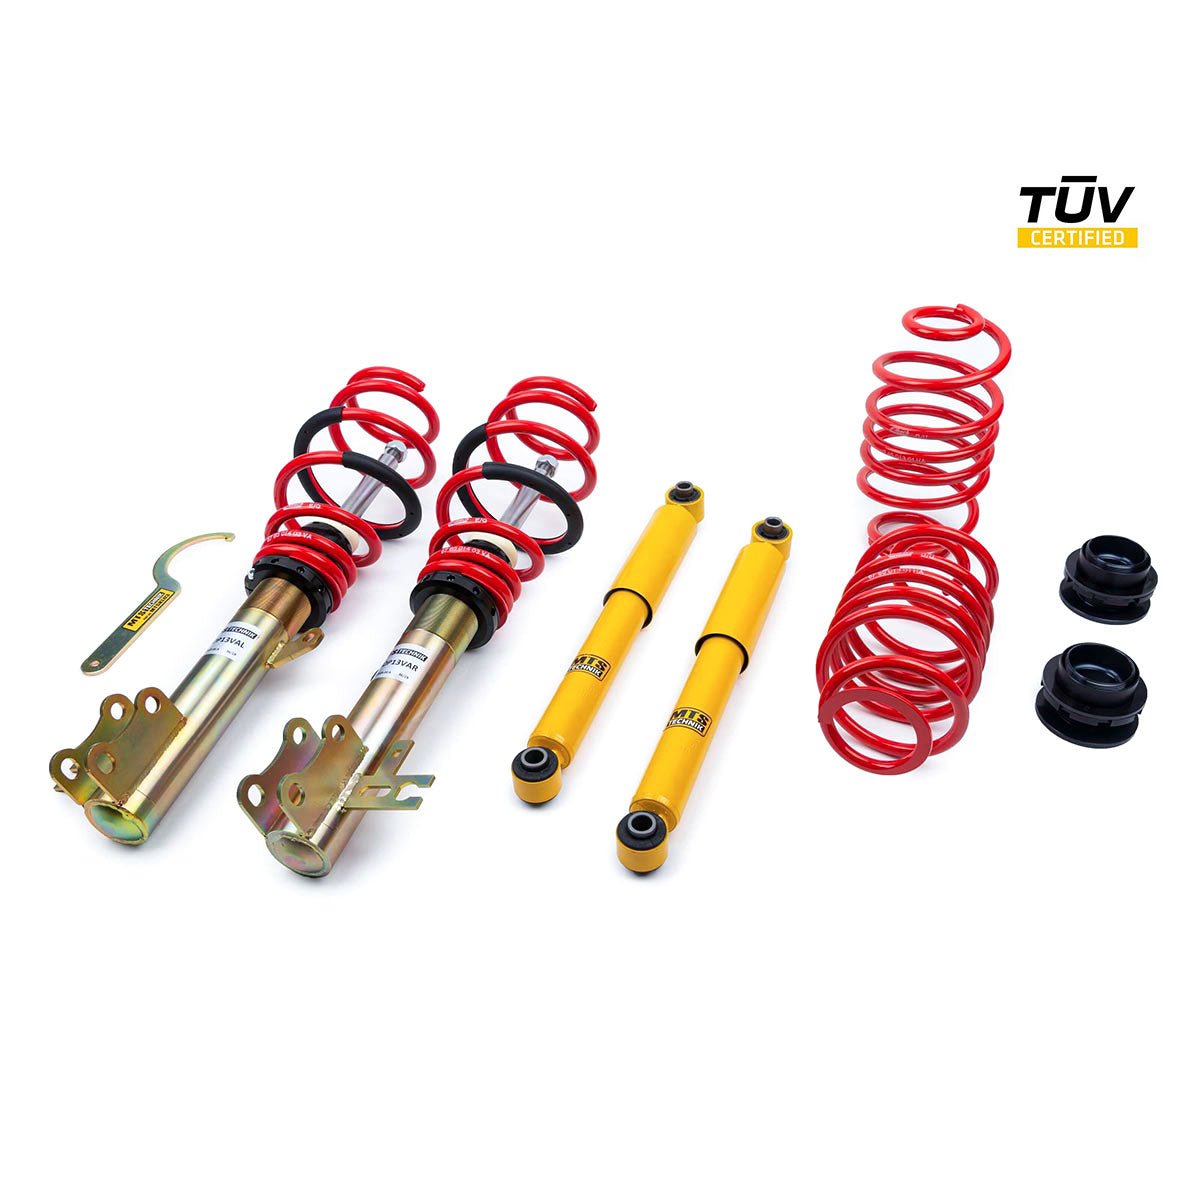 MTS TECHNIK coilover kit STREET Opel Astra H Twintop (with TÜV) - PARTS33 GmbH